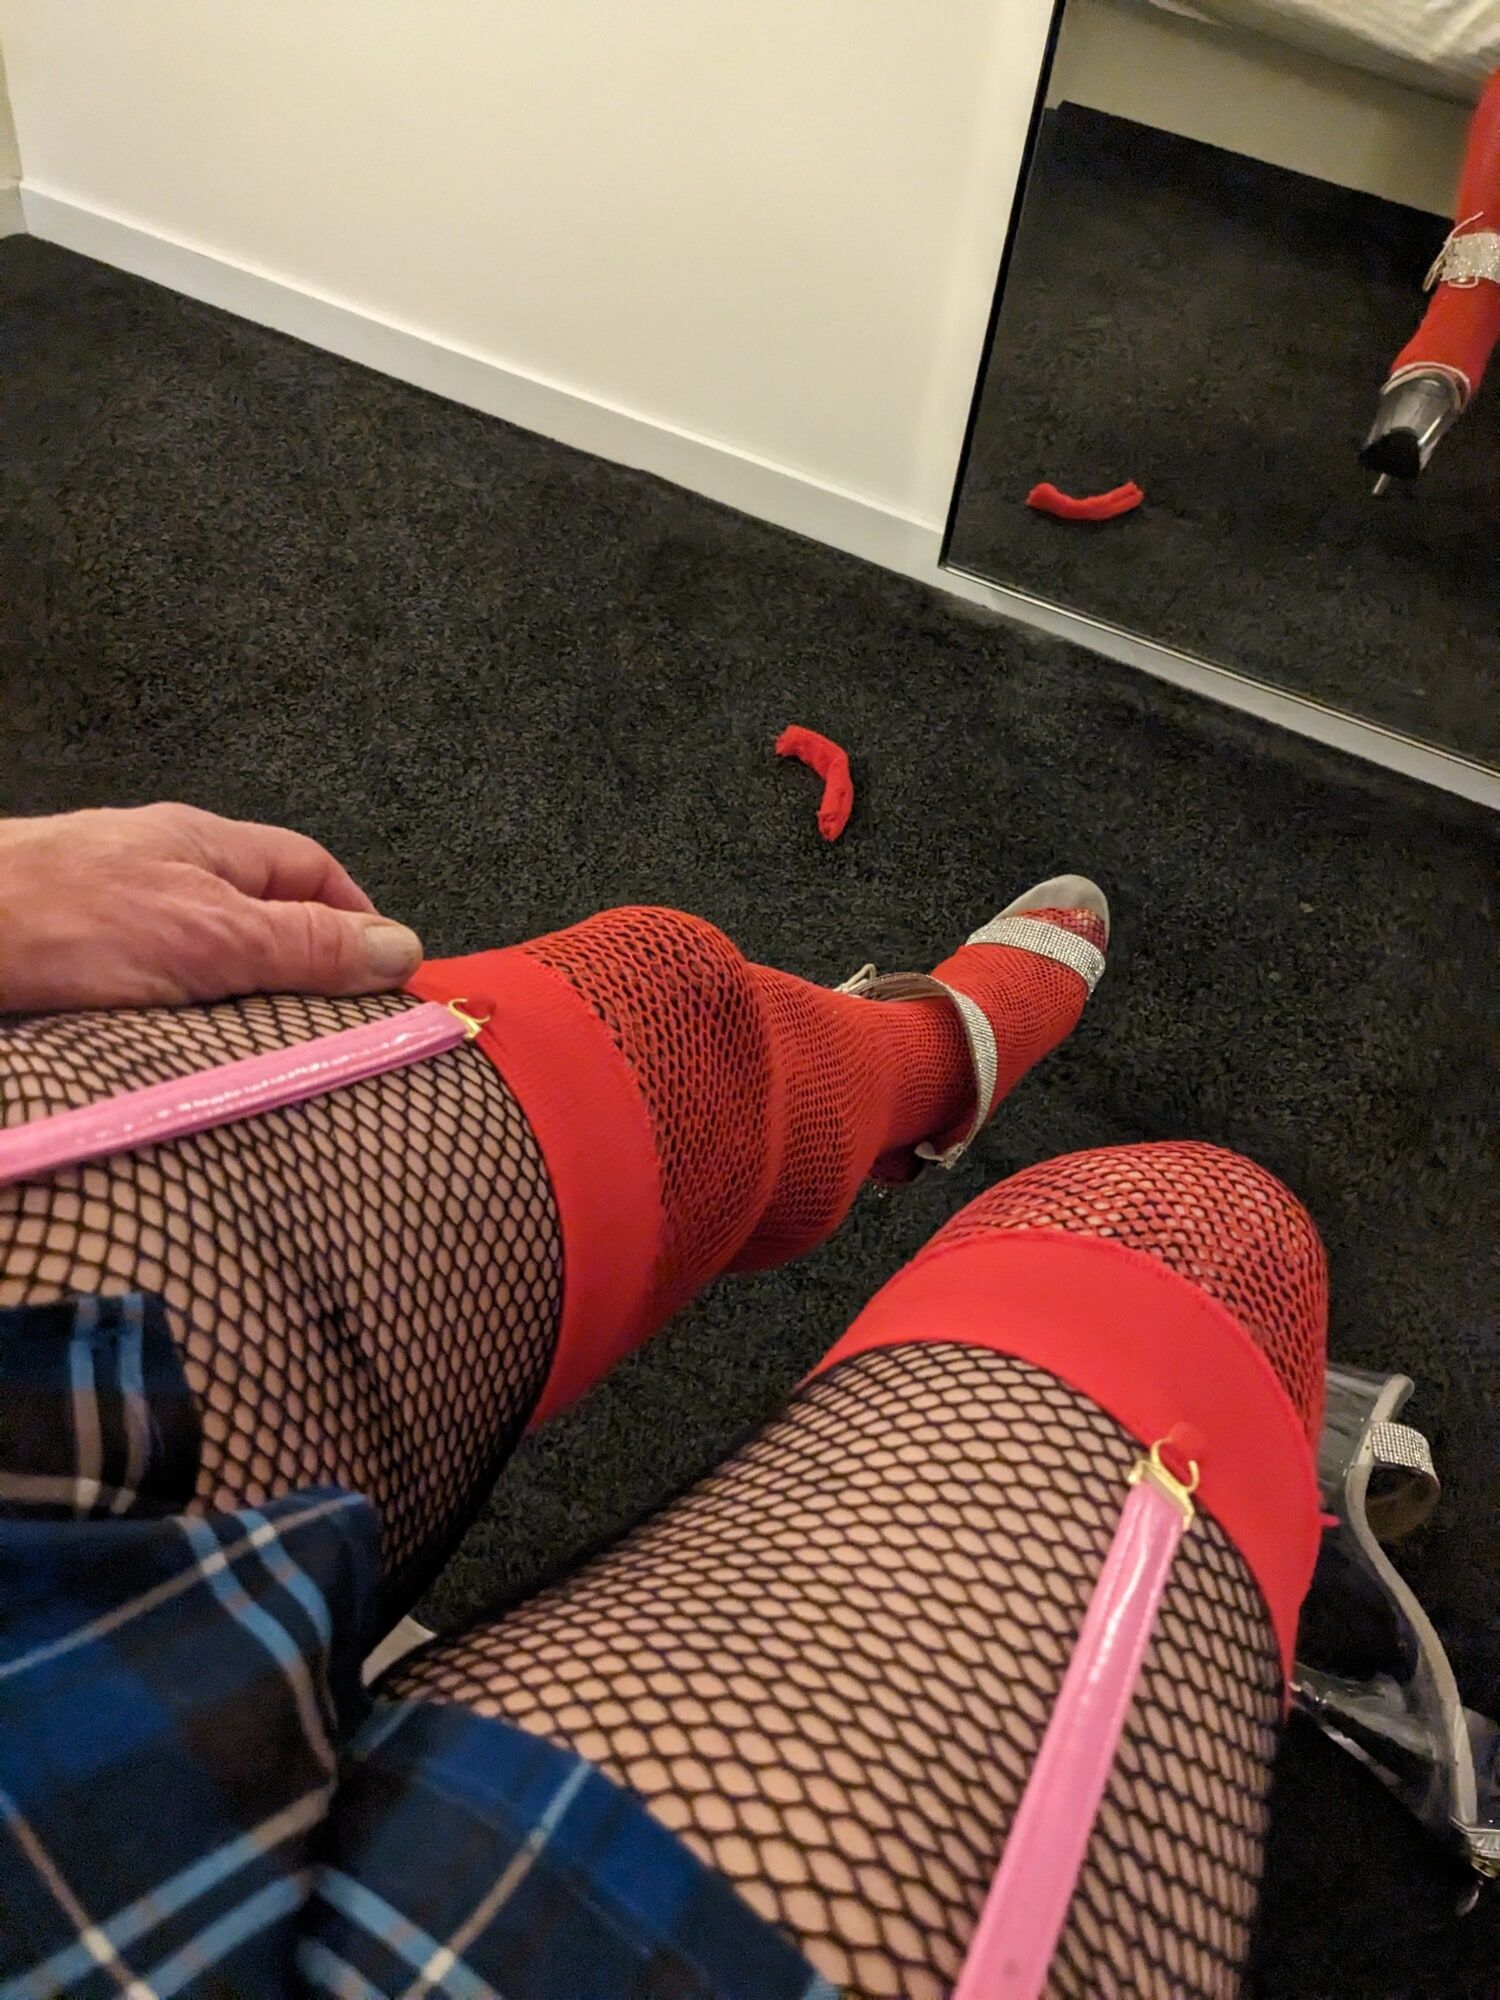 Getting home from cruising a porn theater still hungry for c #8